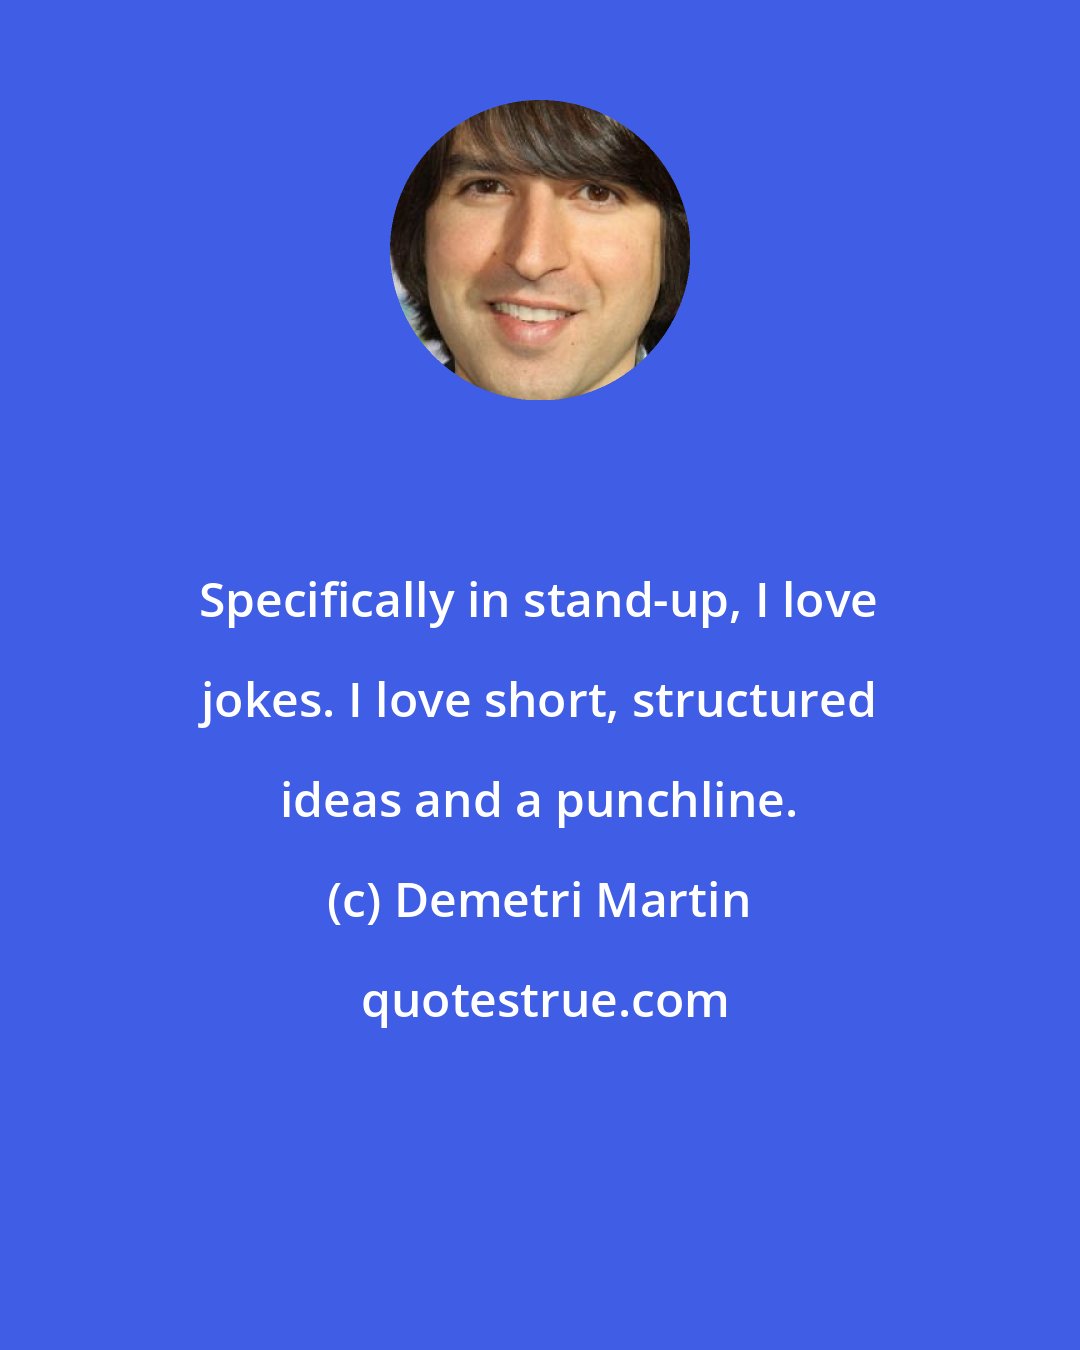 Demetri Martin: Specifically in stand-up, I love jokes. I love short, structured ideas and a punchline.